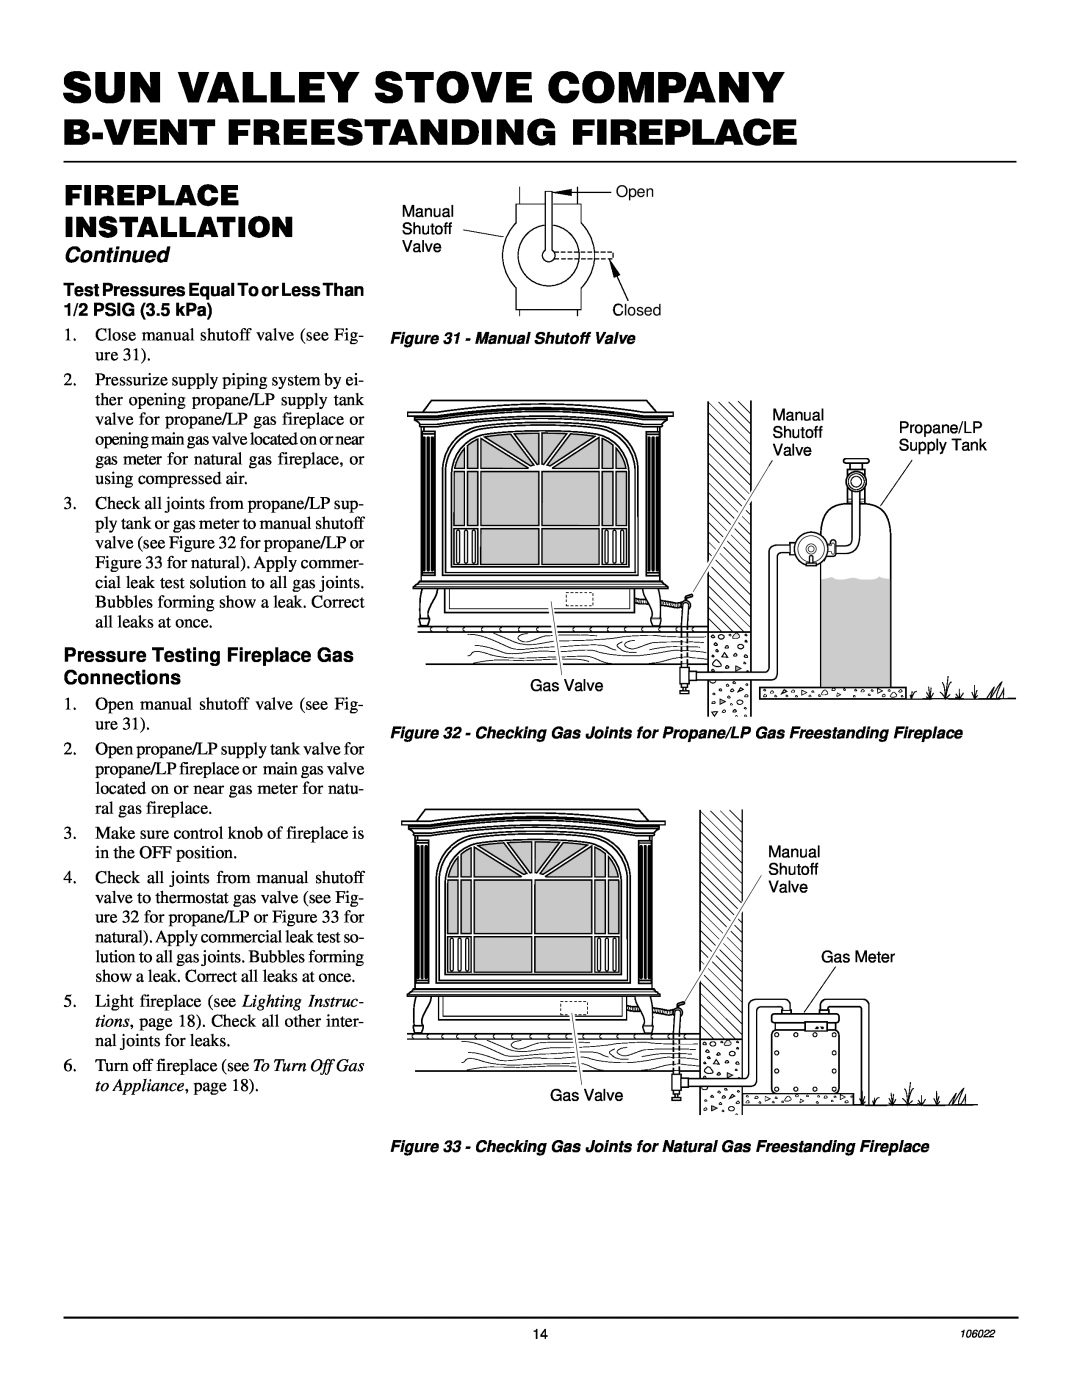 Desa MSBVBP Pressure Testing Fireplace Gas Connections, Sun Valley Stove Company, B-Ventfreestanding Fireplace, Continued 